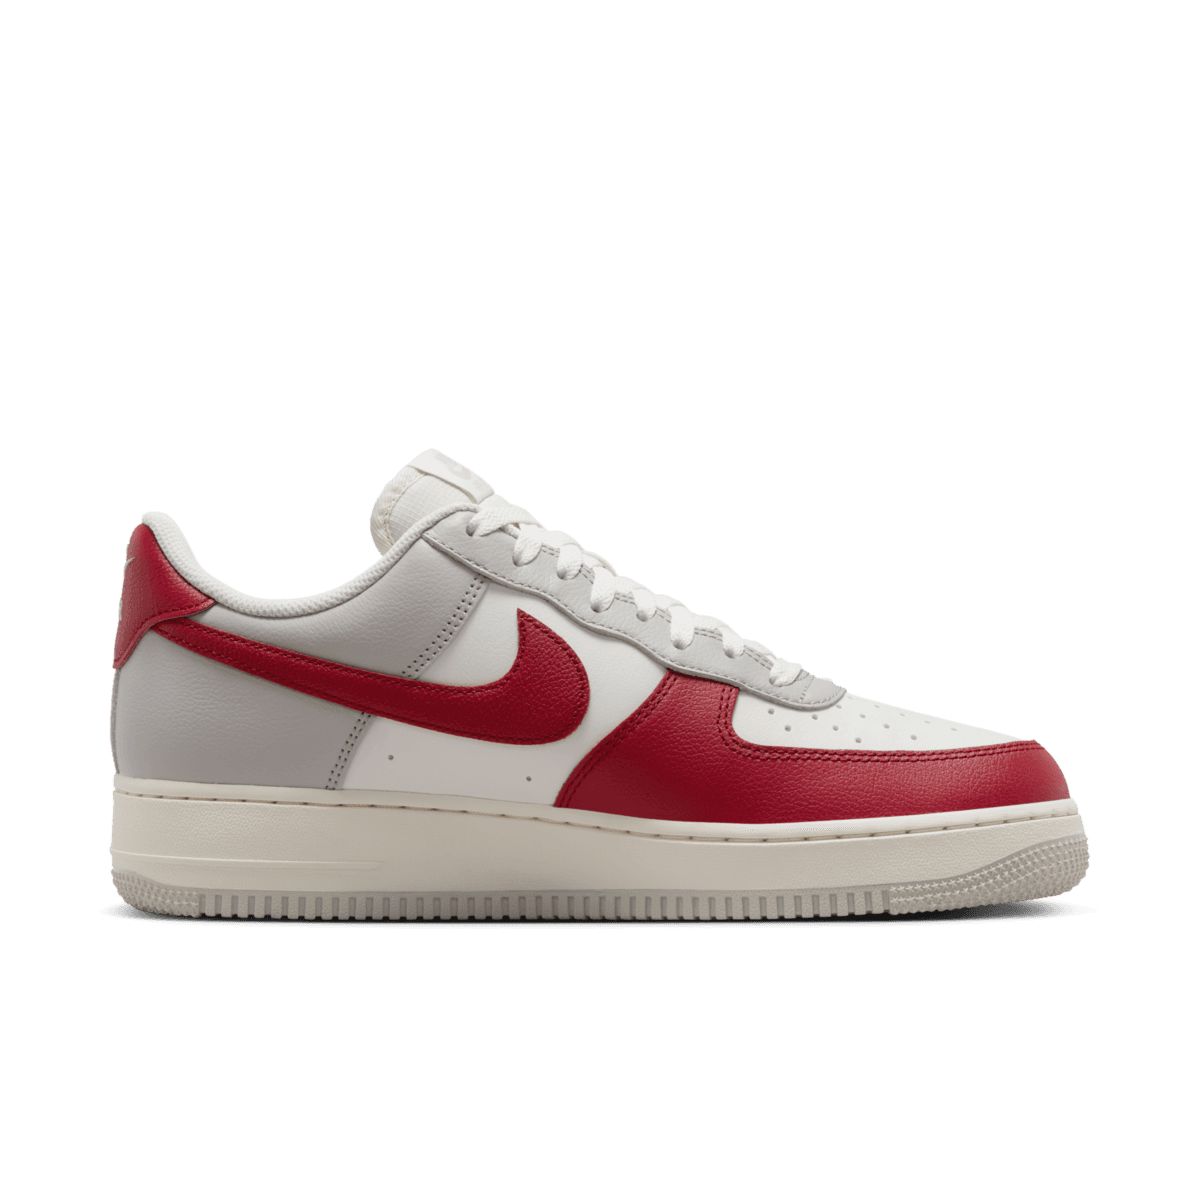 Nike Air Force 1 Low 'Red Toe' HJ9094-012